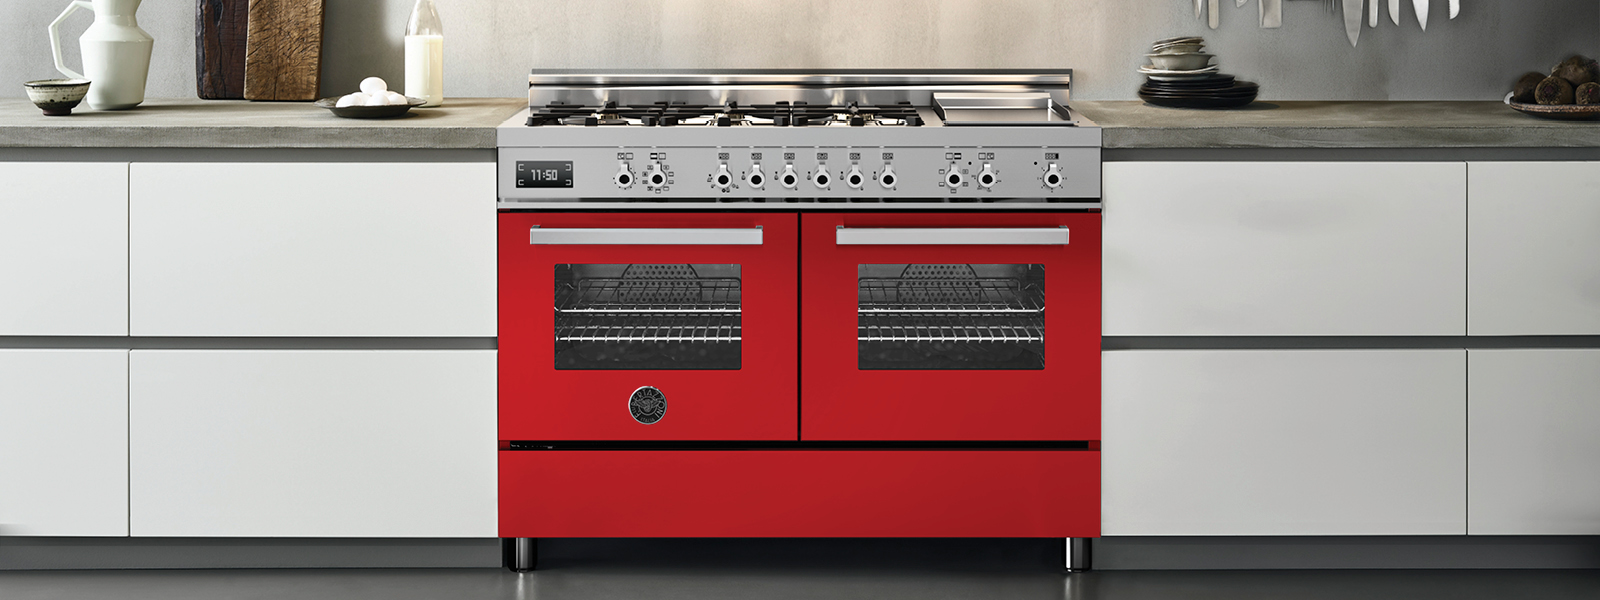 Save 15% on all Bertazzoni Professional 90cm & 120cm Colour Range Cookers at Hart & Co